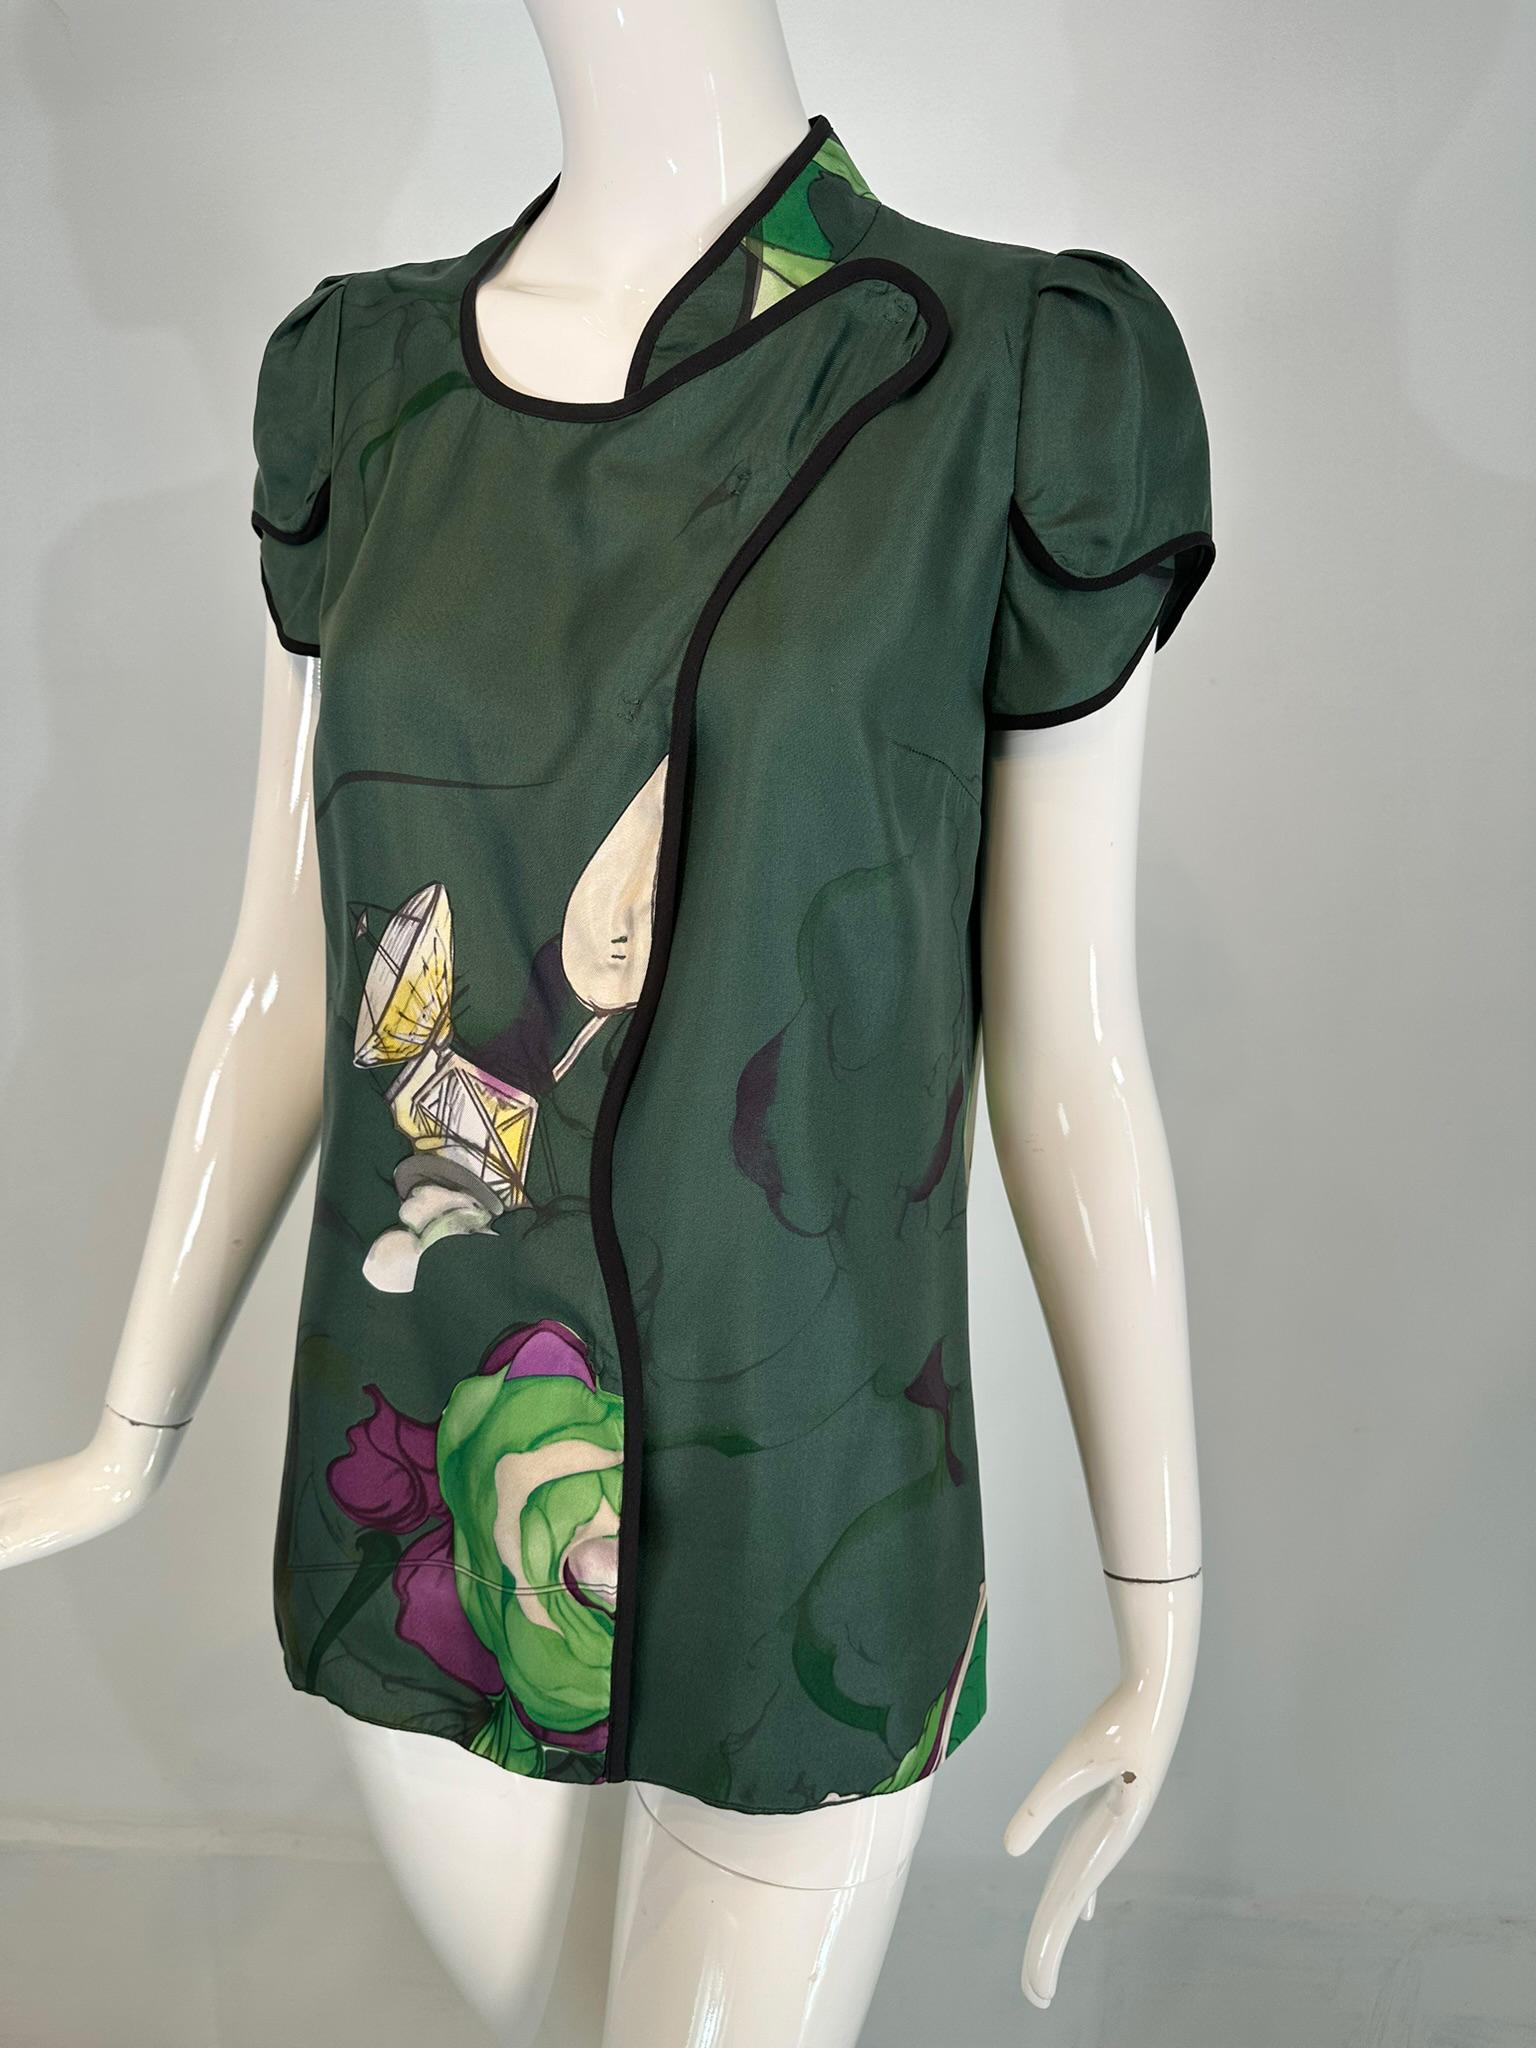 From one of Muccia Prada's most imaginative collections, the fairy collection with art by James Jean S/S 2008 runway collection in forest green silk with petal sleeves, castles & clouds blouse/top. Closes at the front side with hidden snaps. The